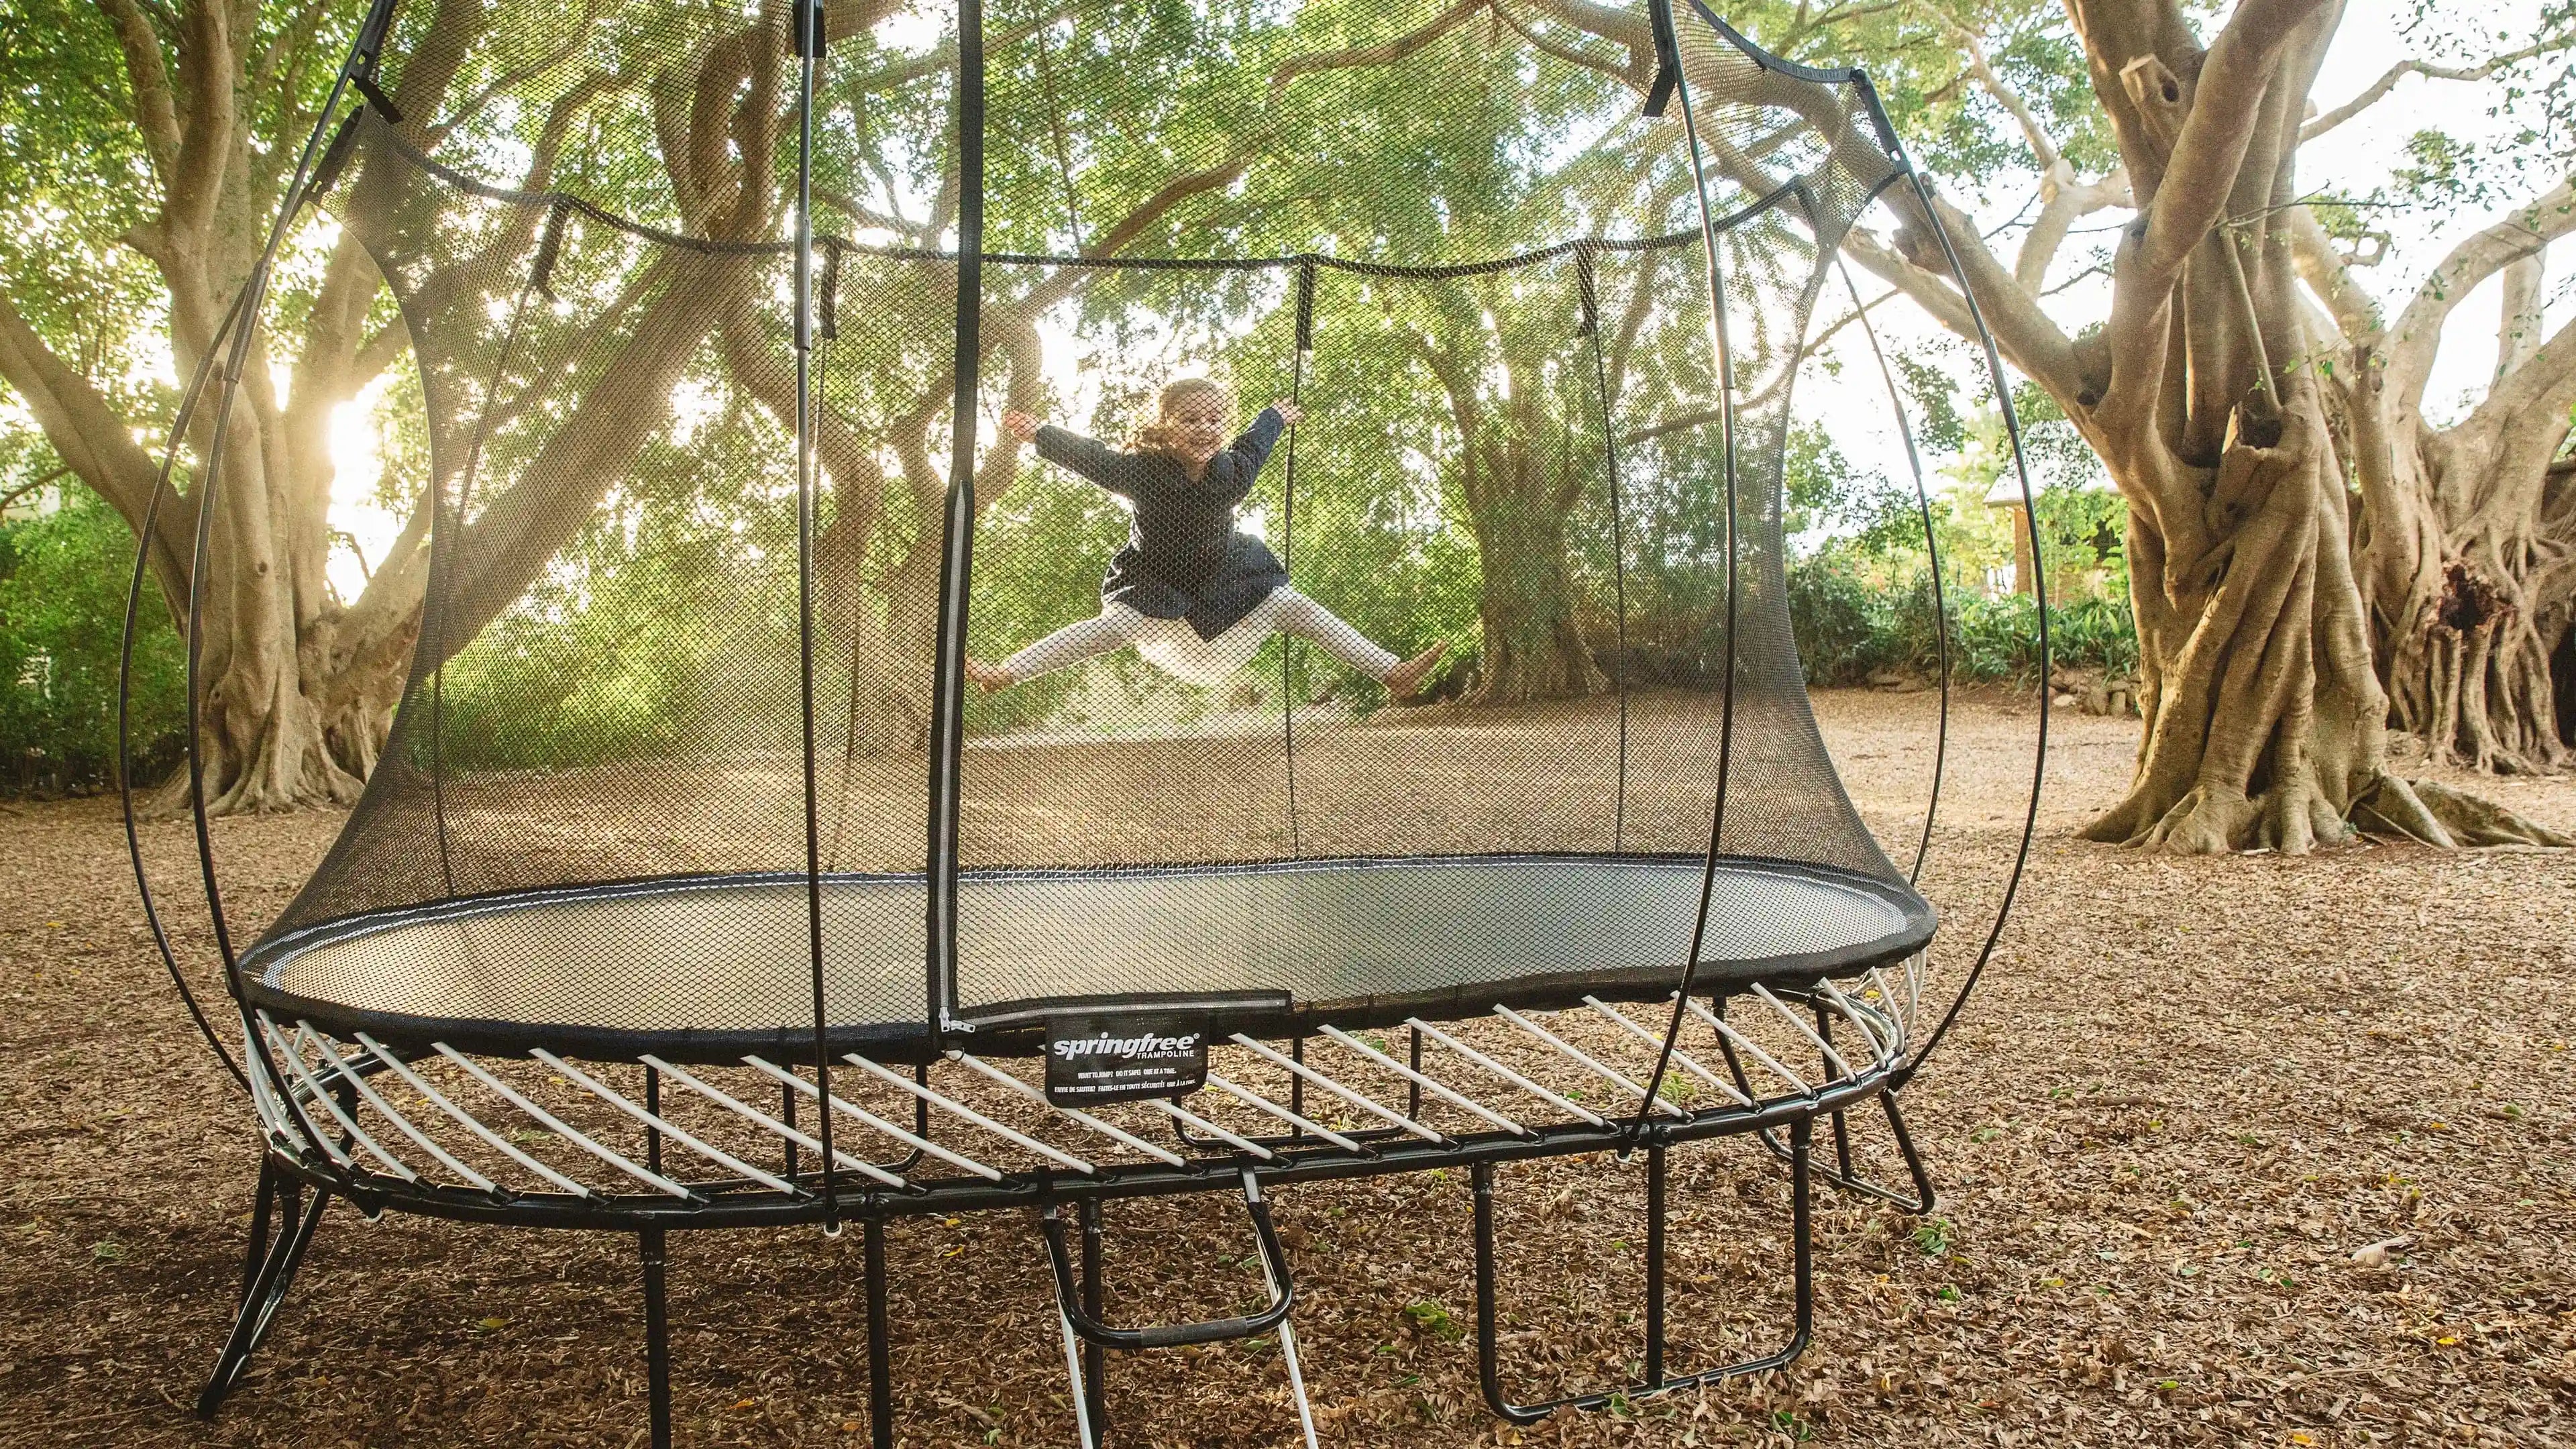 young girl jumping high on an outdoor trampoline